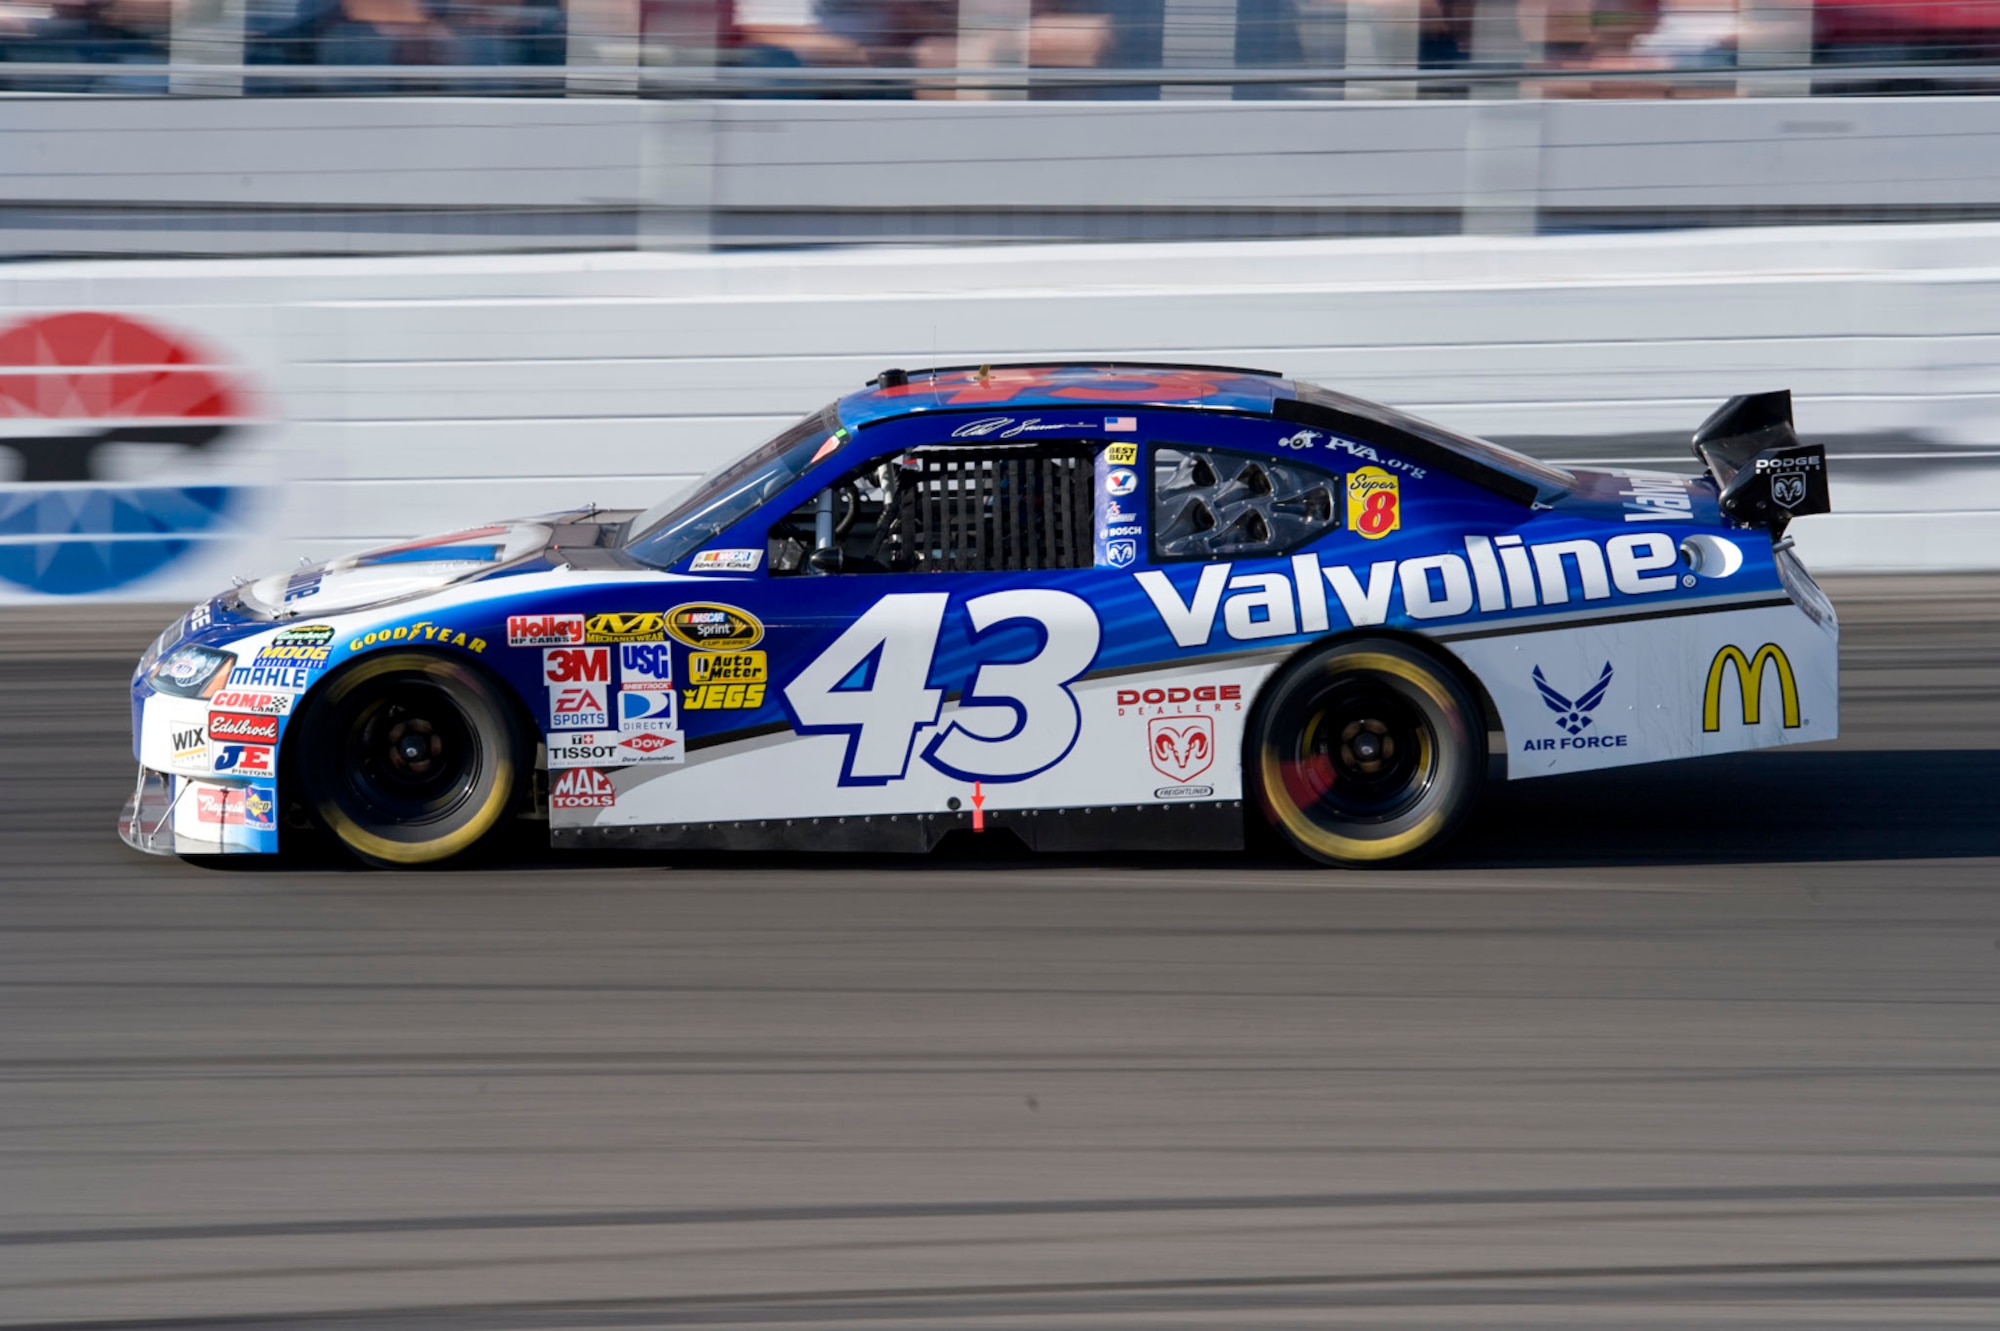 Reed Sorenson drives the Air Force sponsored No. 43 Dodge through turn 4 during the Shelby 427 race March 1 at the Las Vegas Motor Speedway. (U.S. Air Force photo/Master Sgt. Jack Braden)